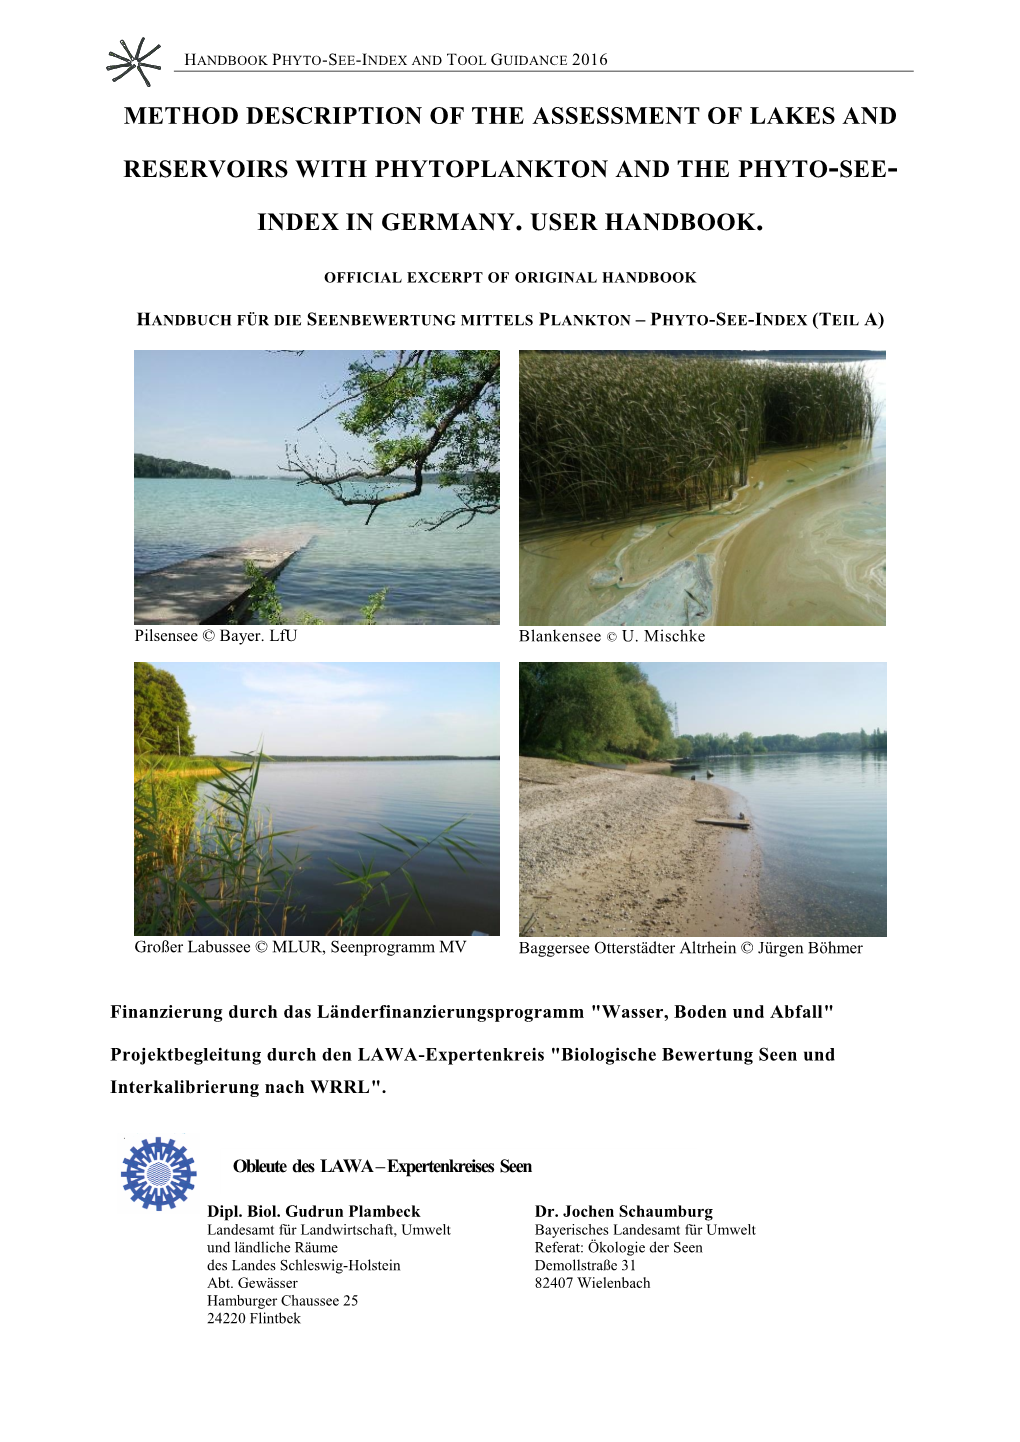 Method Description of the Assessment of Lakes and Reservoirs with Phytoplankton and the Phyto-See-Index in Germany